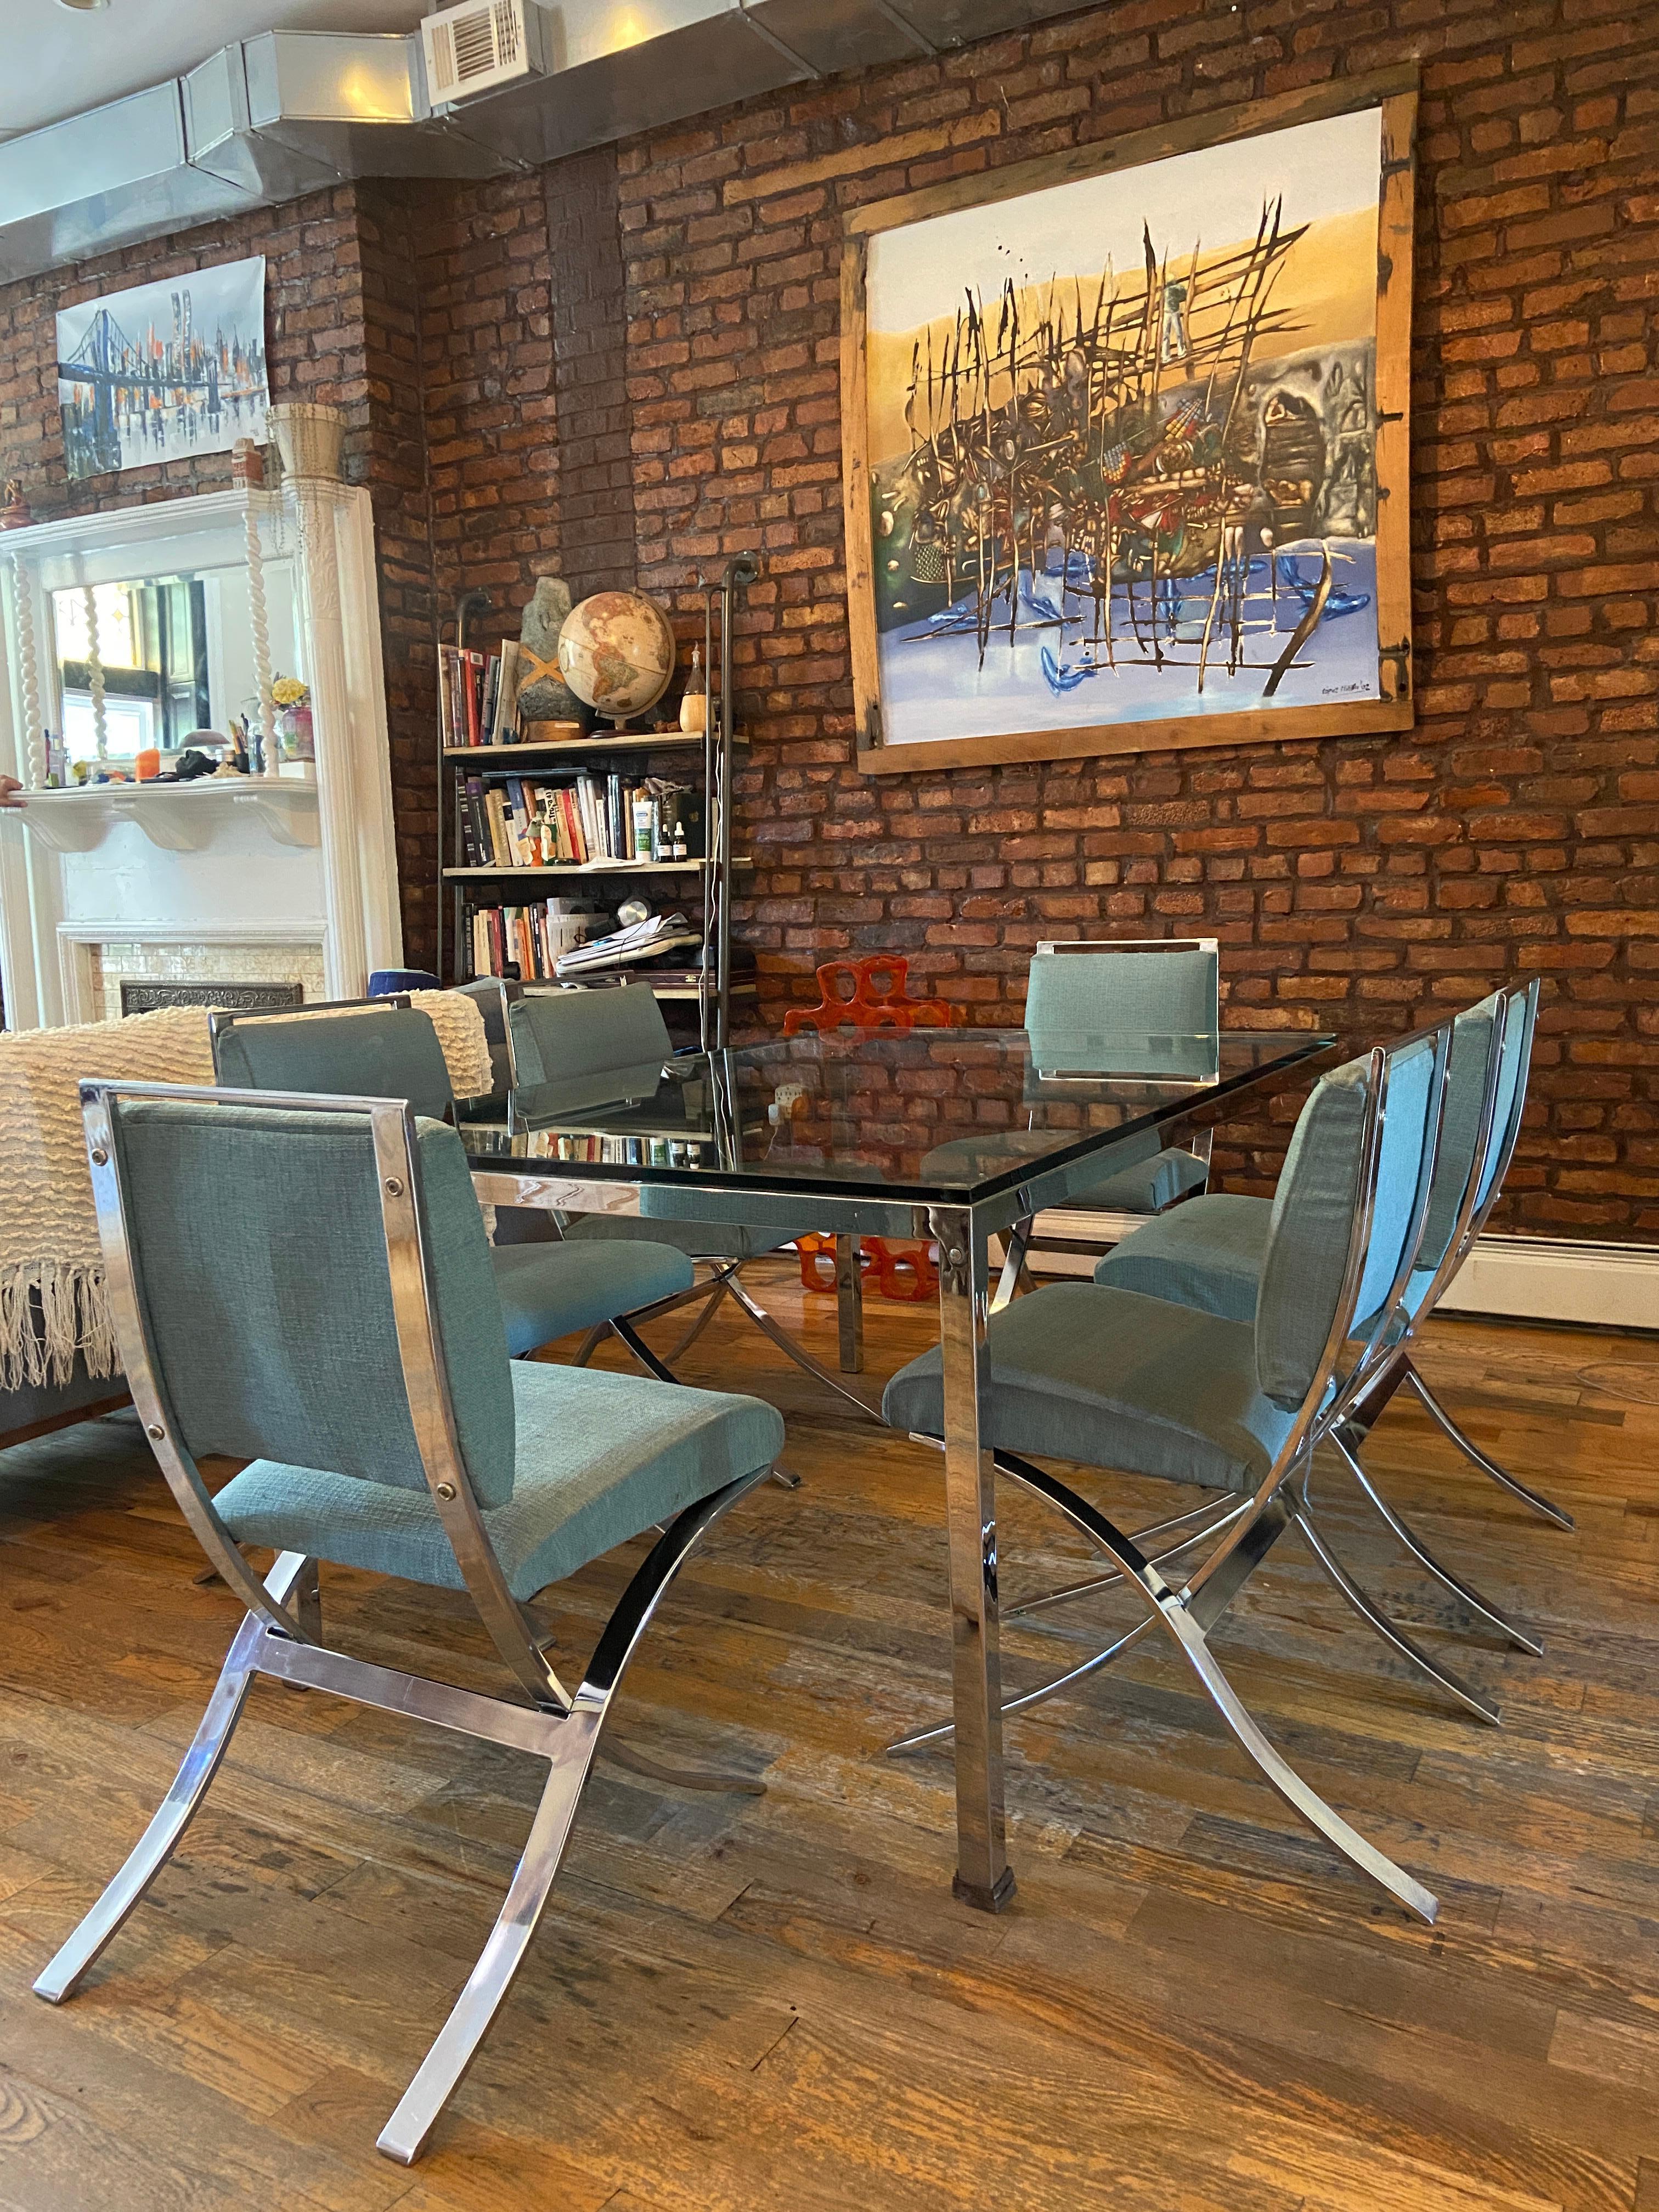 This is one stylish vintage chrome dining set. Includes six dining chairs with chrome frames and upholstered seats and backs, plus a matching chrome frame and glass top dining table. Making a beautiful Mid-Century Modern statement in any setting,